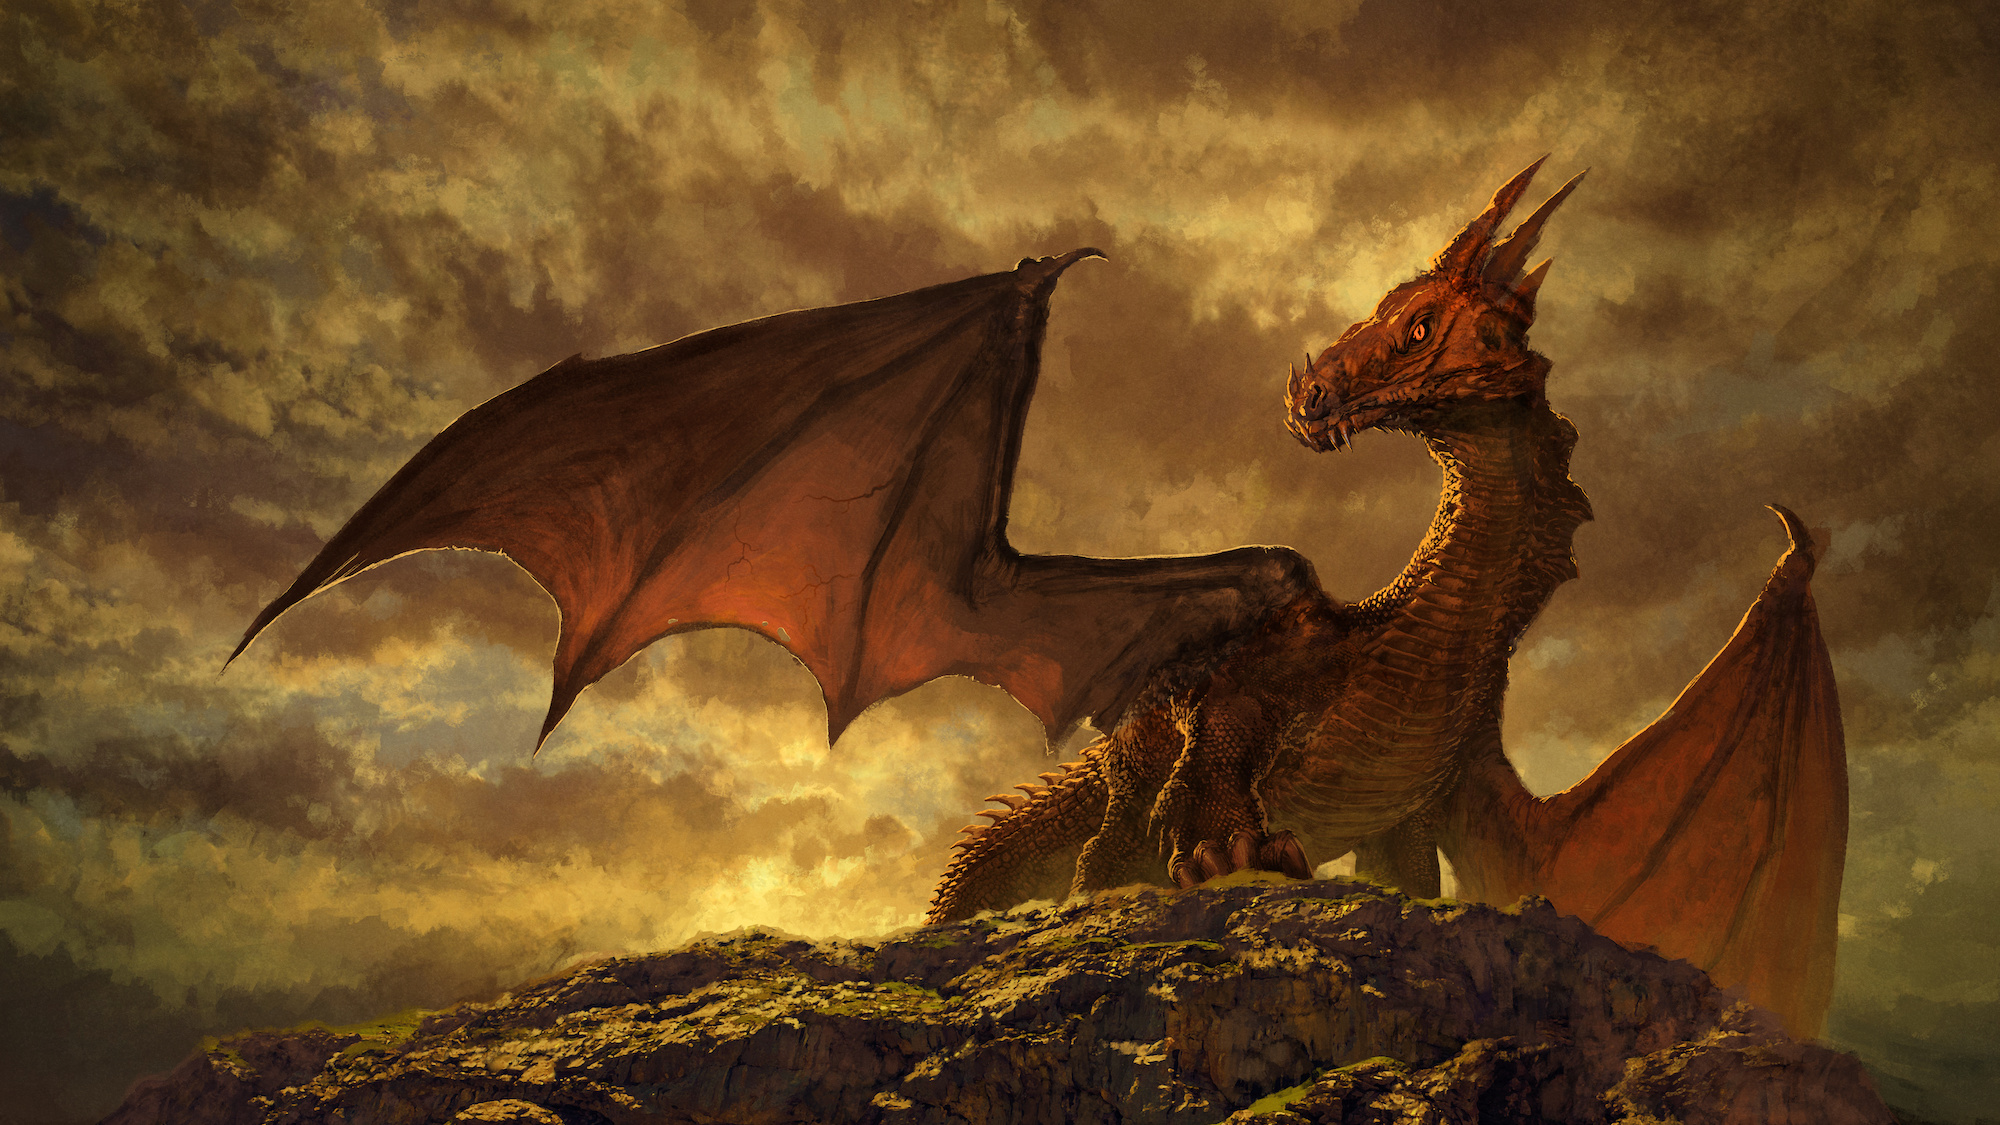 What are your favorite interpretations of dragons in fantasy